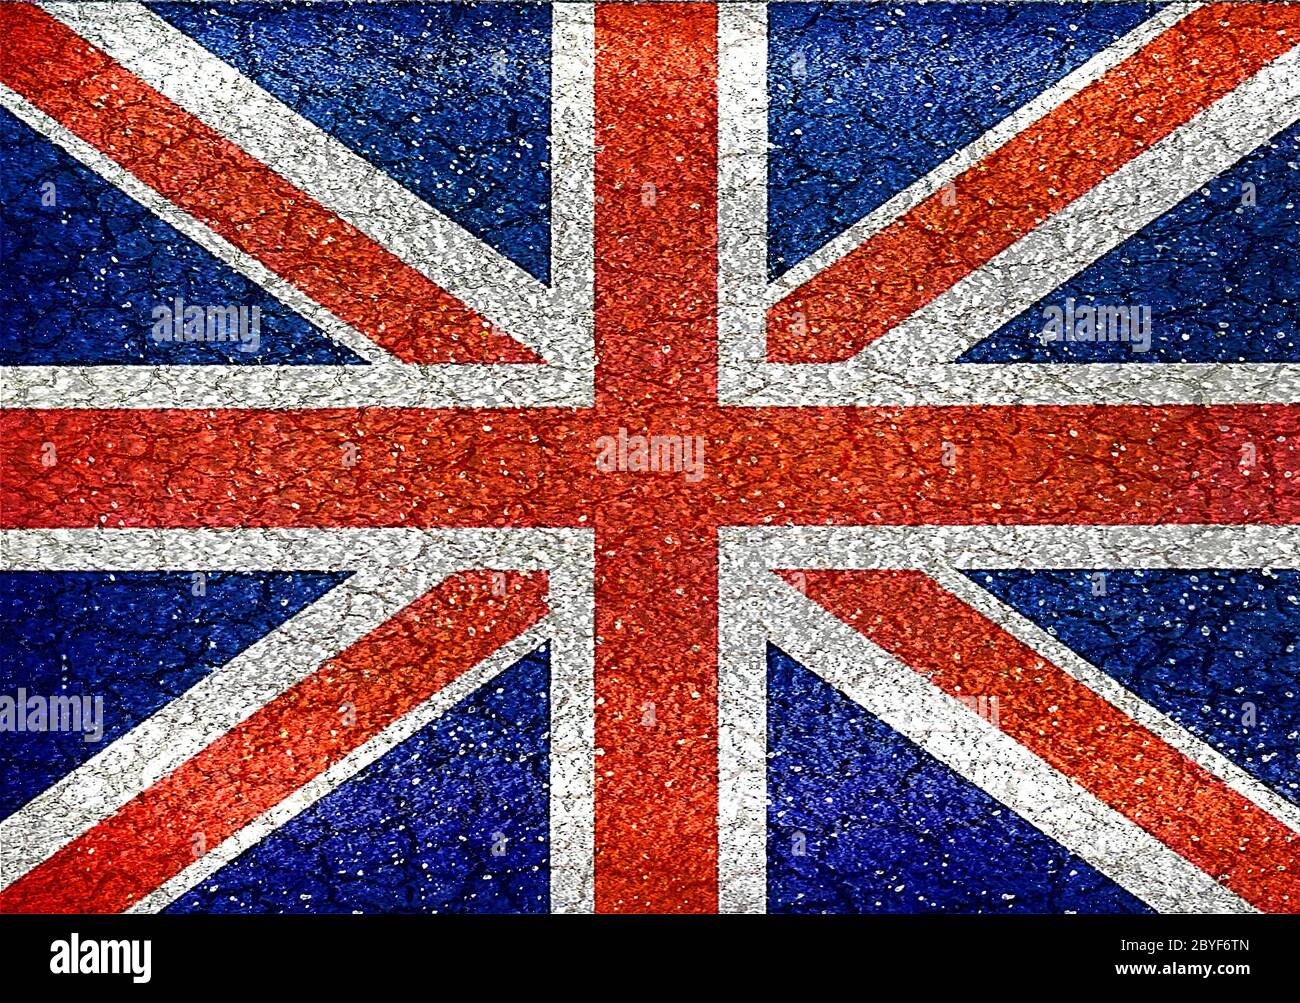 England grunge style flag in vibrant colors. Stock Photo